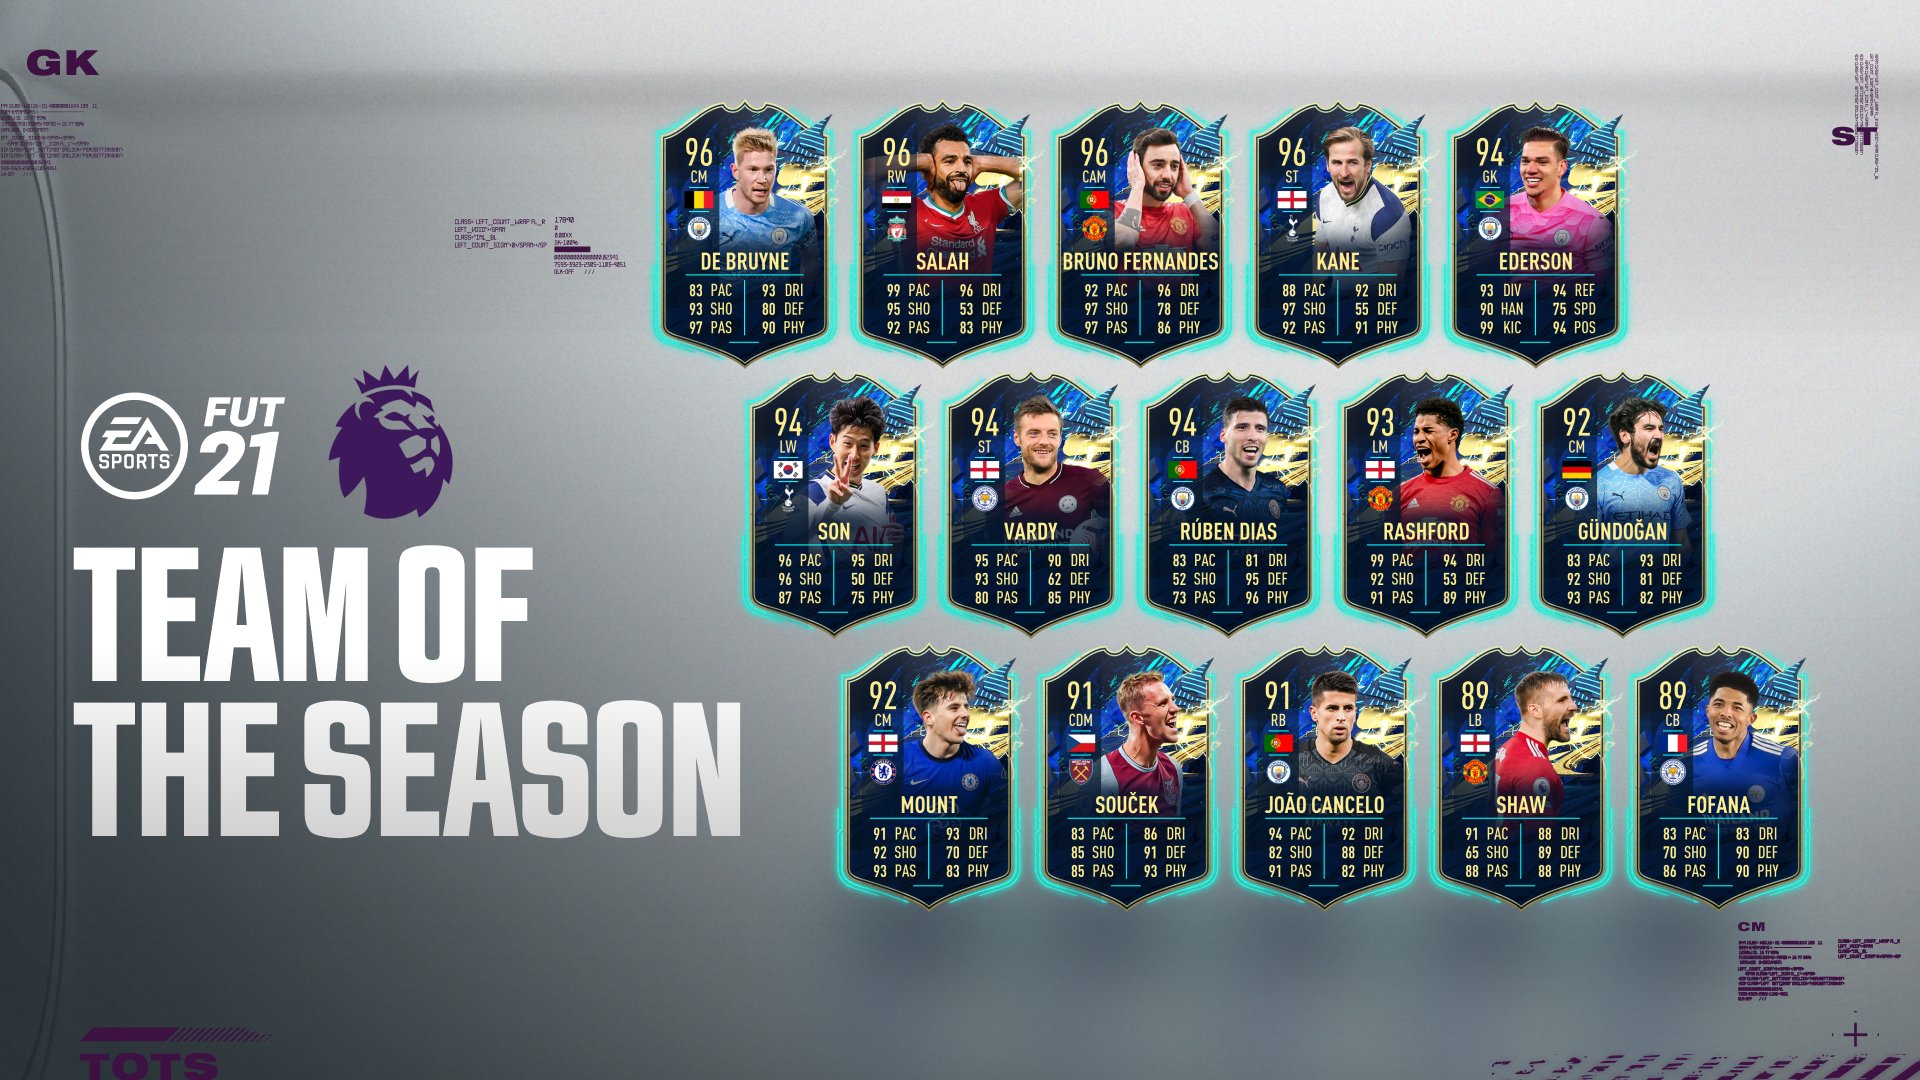 Laliga TOTS Event Icons #FIFAMobile #TOTS #FIFAMobile21 #fm21 Follow ▶️  @fmzofficial for more